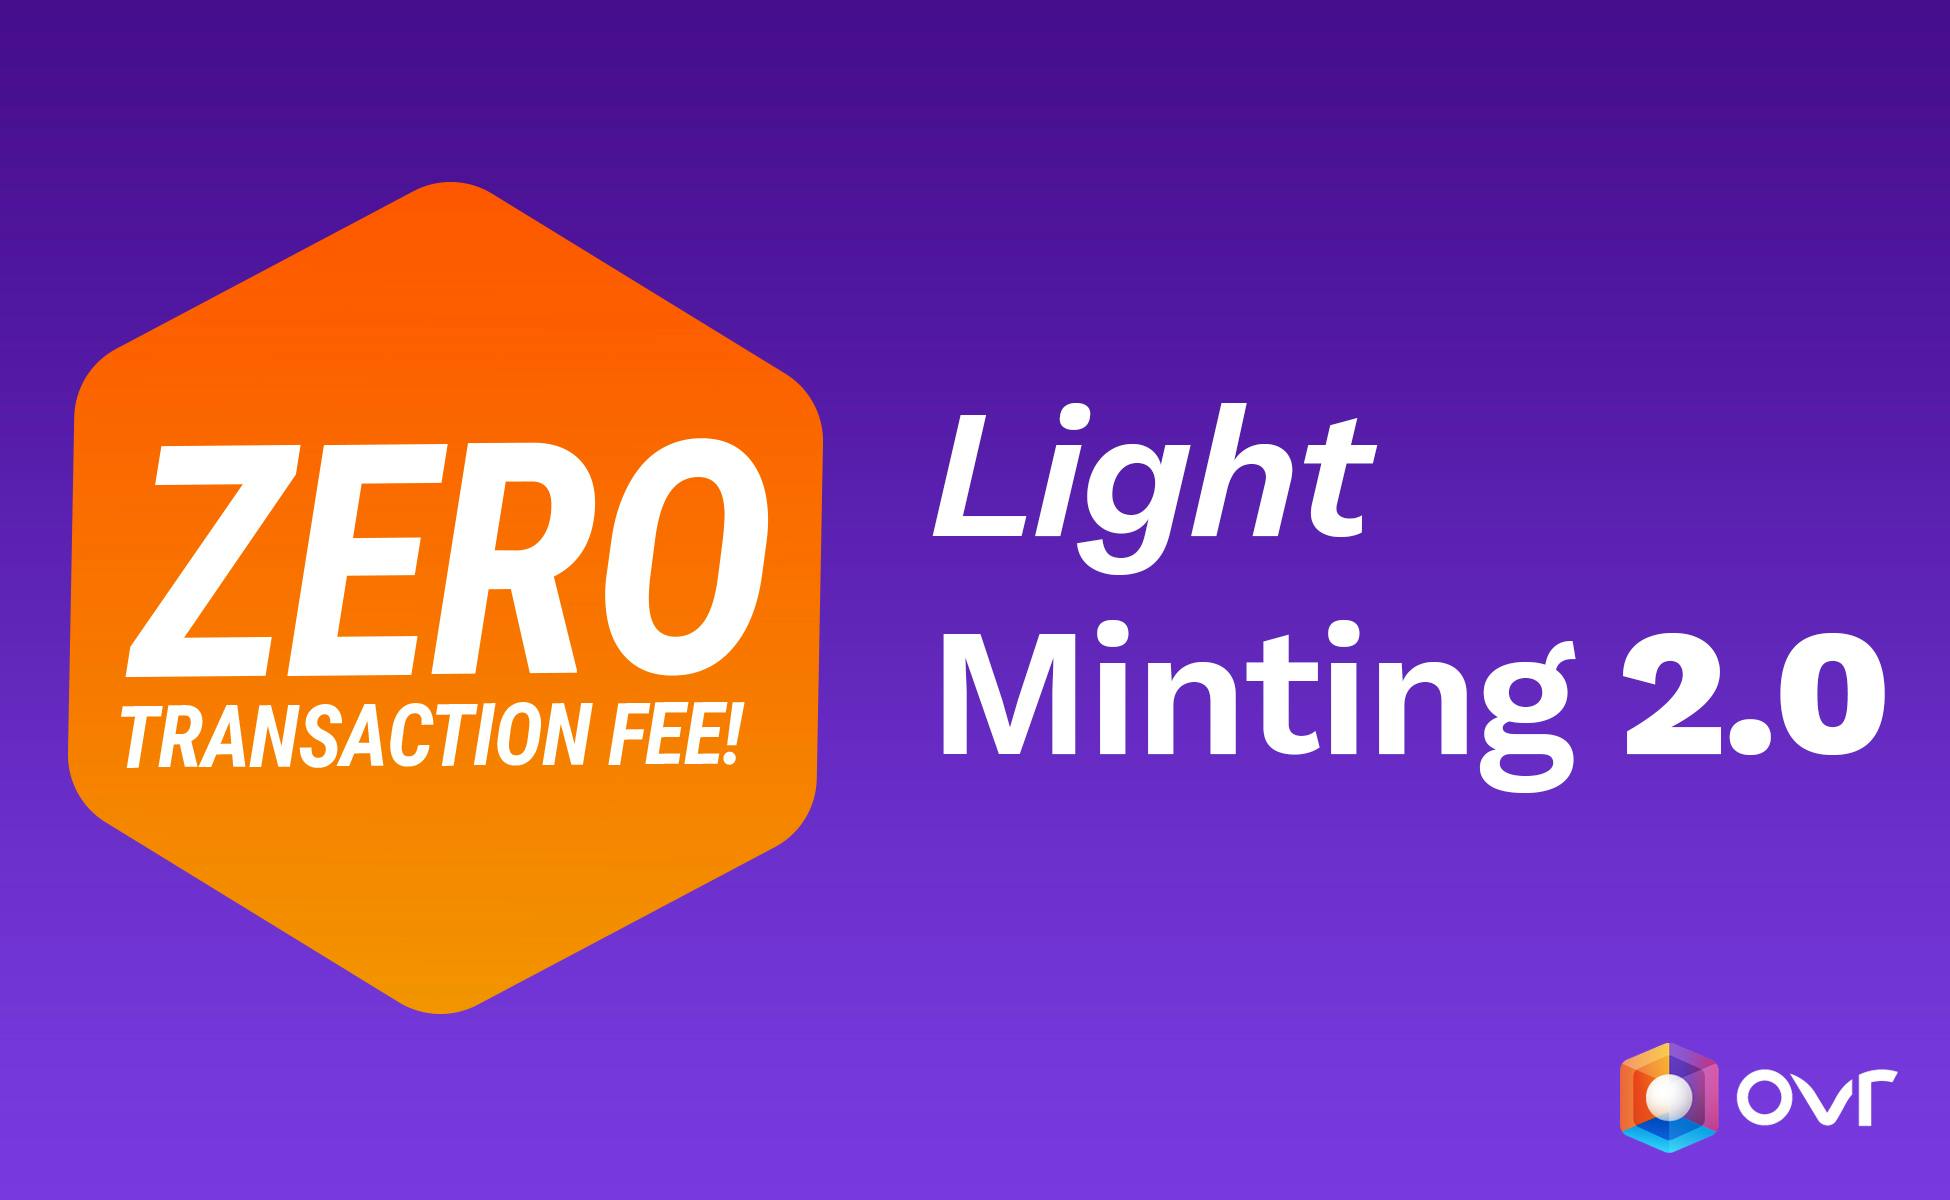 Light Minting 2.0 is Live